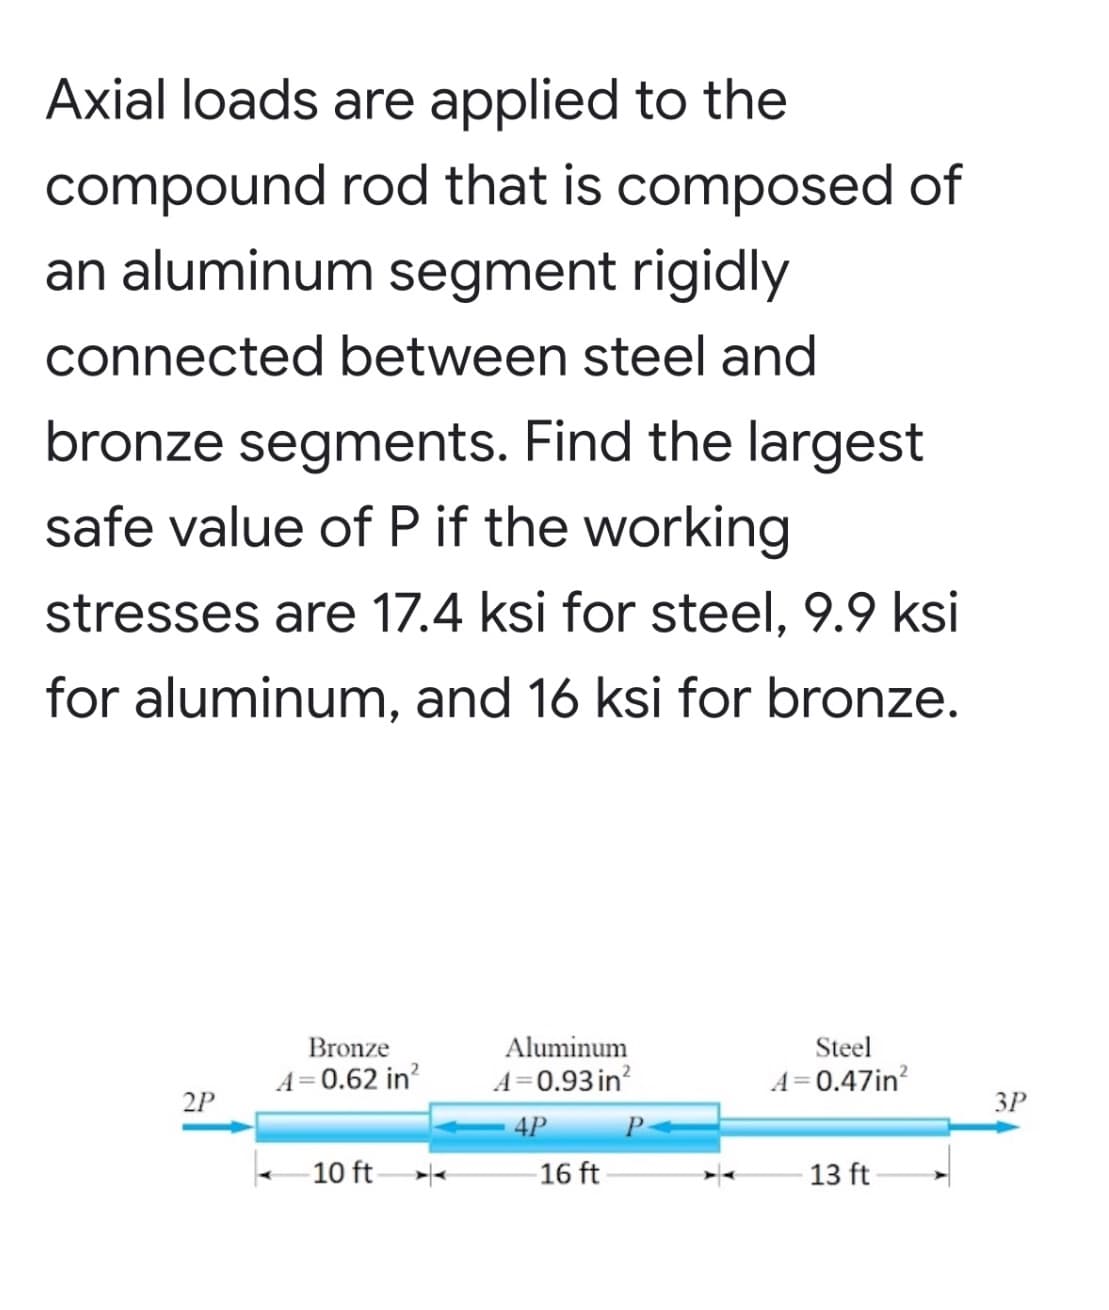 Axial loads are applied to the
compound rod that is composed of
an aluminum segment rigidly
connected between steel and
bronze segments. Find the largest
safe value of P if the working
stresses are 17.4 ksi for steel, 9.9 ksi
for aluminum, and 16 ksi for bronze.
Bronze
Aluminum
Steel
A=0.62 in?
A=0.93 in?
A= 0.47in?
2P
3P
4P
P
10 ft-
16 ft
13 ft
